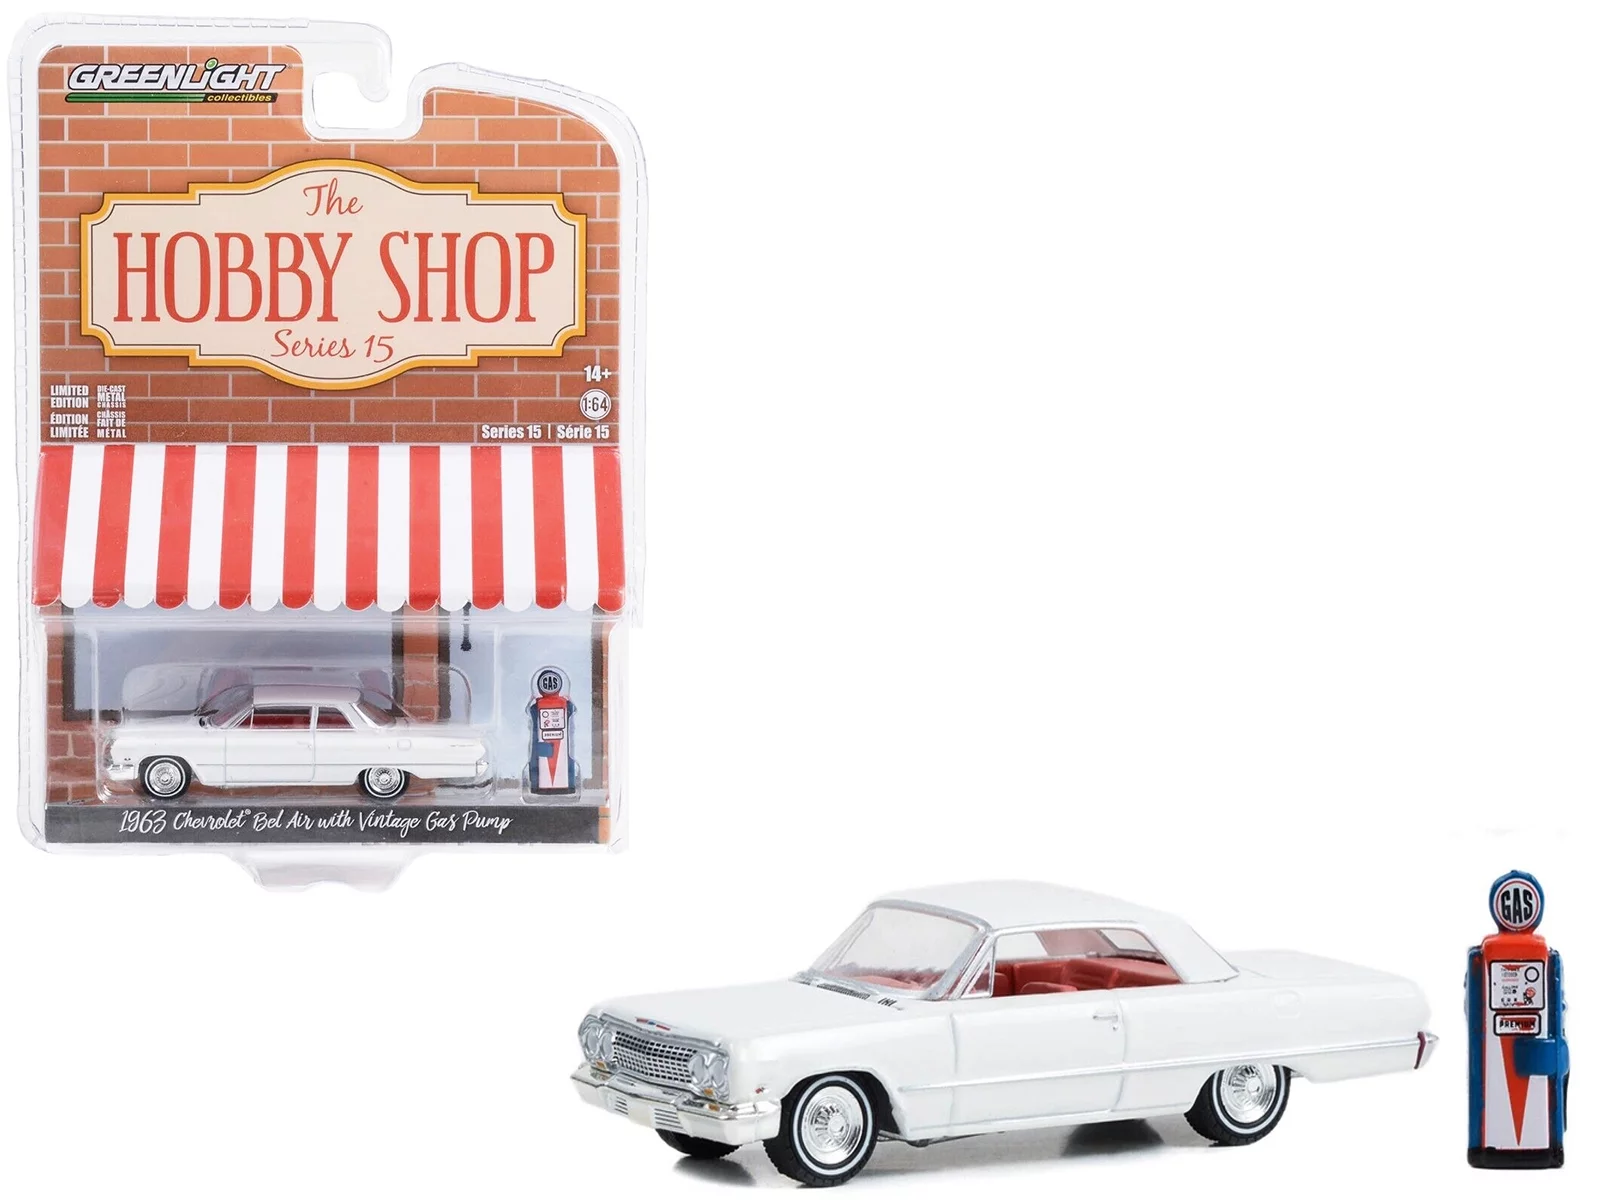 Greenlight 1/64 The Hobby Shop Series 15- 1963 Chevrolet Bel Air with Vintage Gas Pump 97150-A